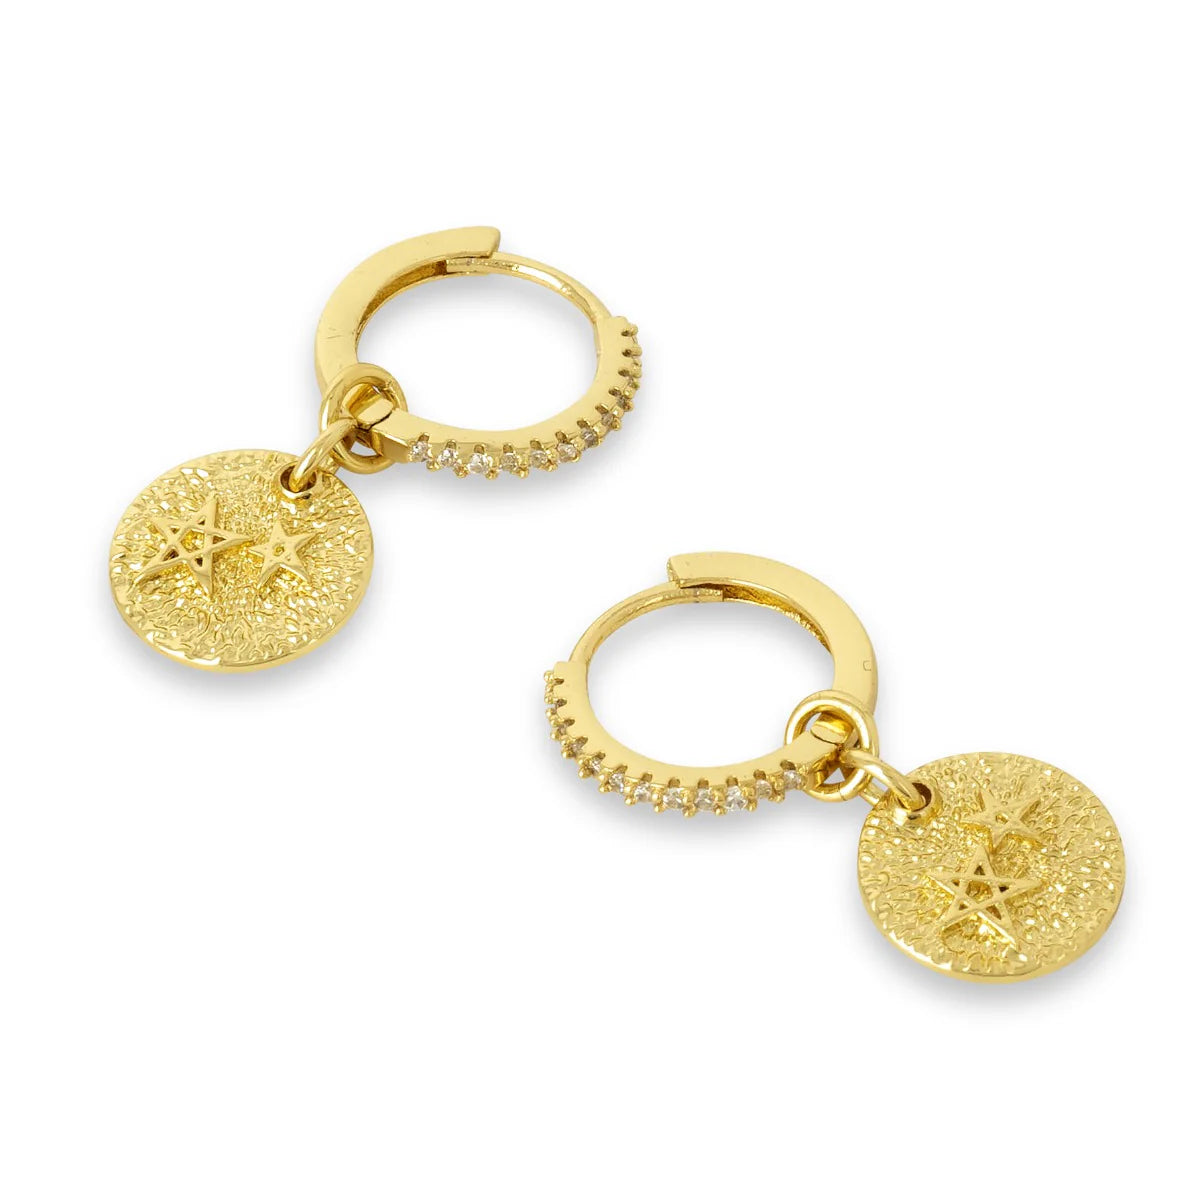 Starlight huggies-Gold hoops with star patterned discs-Cubic Zirconia on hoops